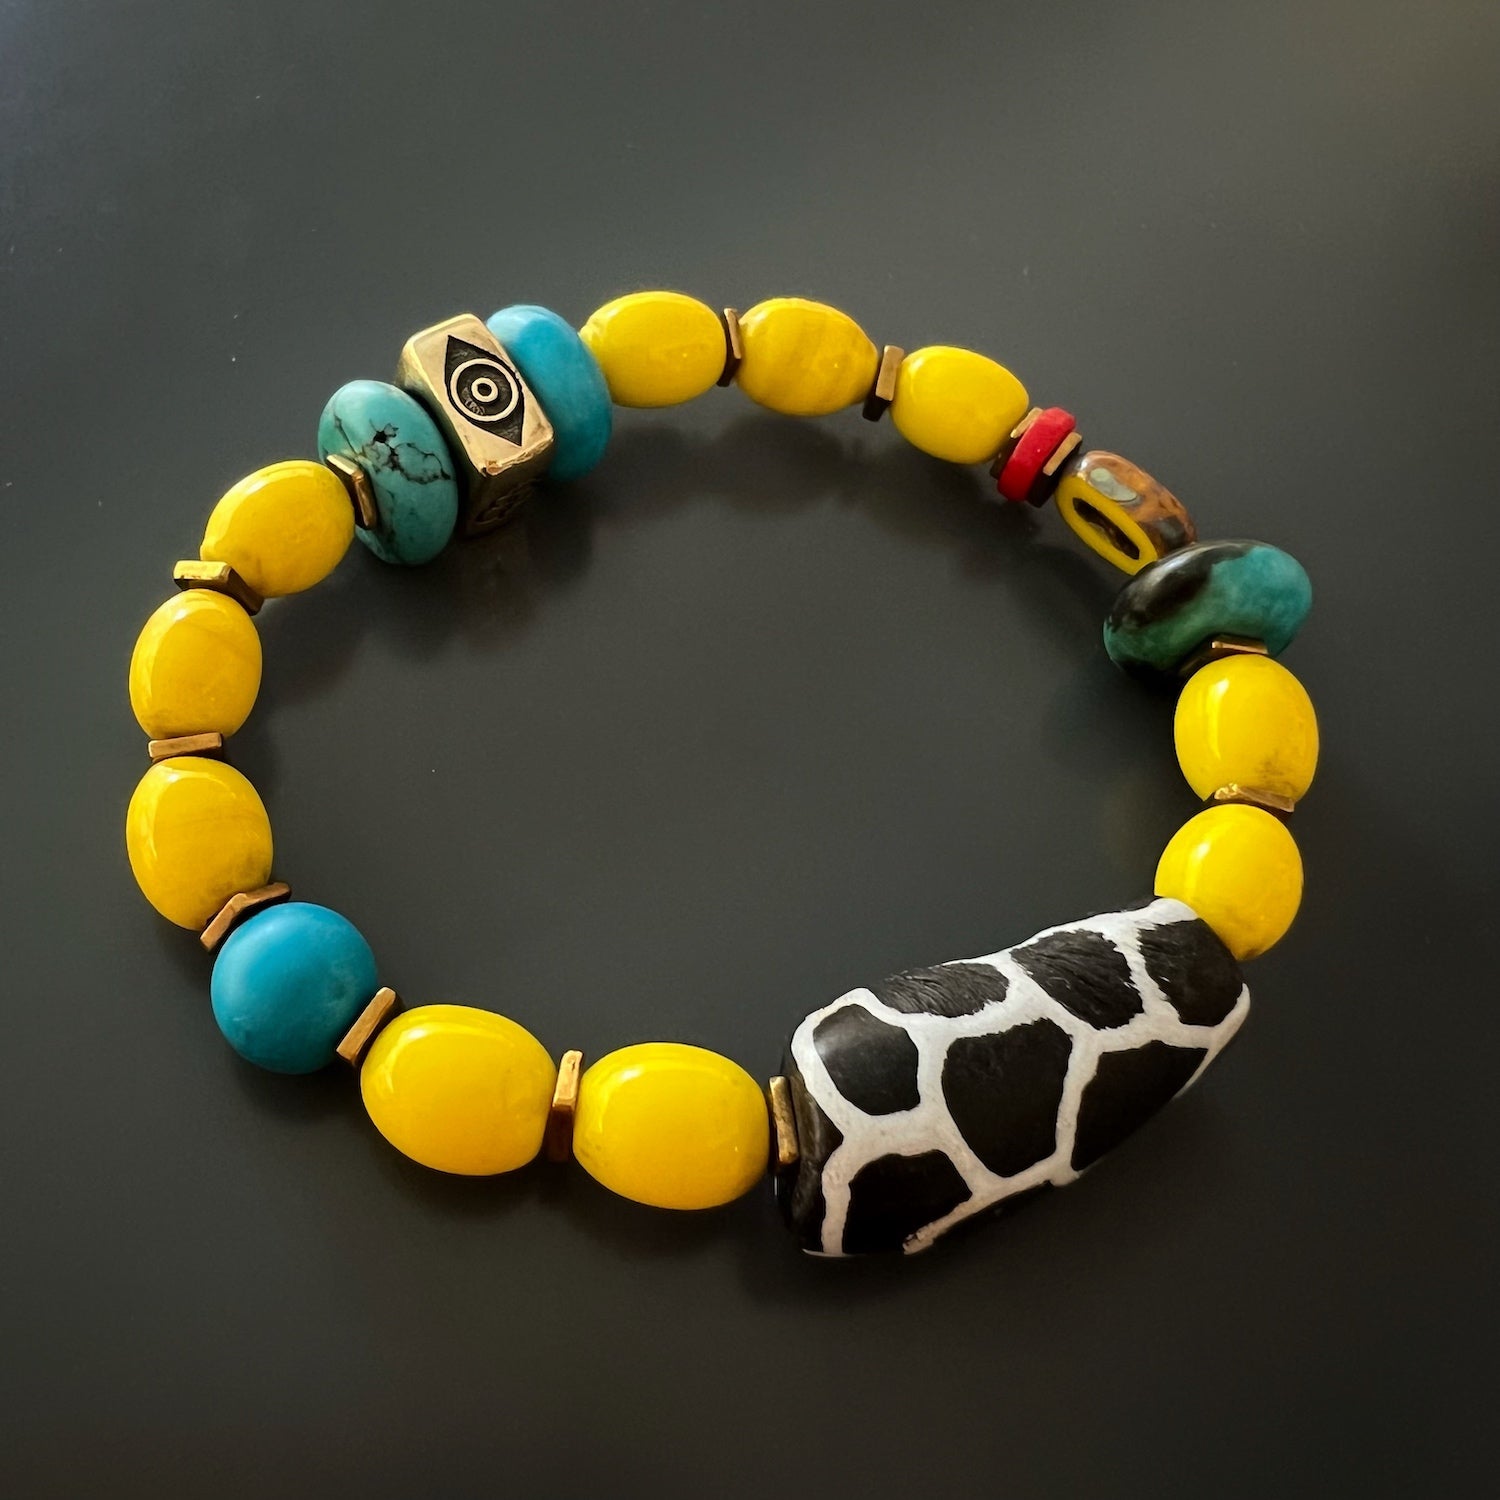 the Happiness Symbol Yellow Bracelet, highlighting the stretchy jewelry cord and the high-quality craftsmanship of the handmade piece, emphasizing its durability and comfortable fit.